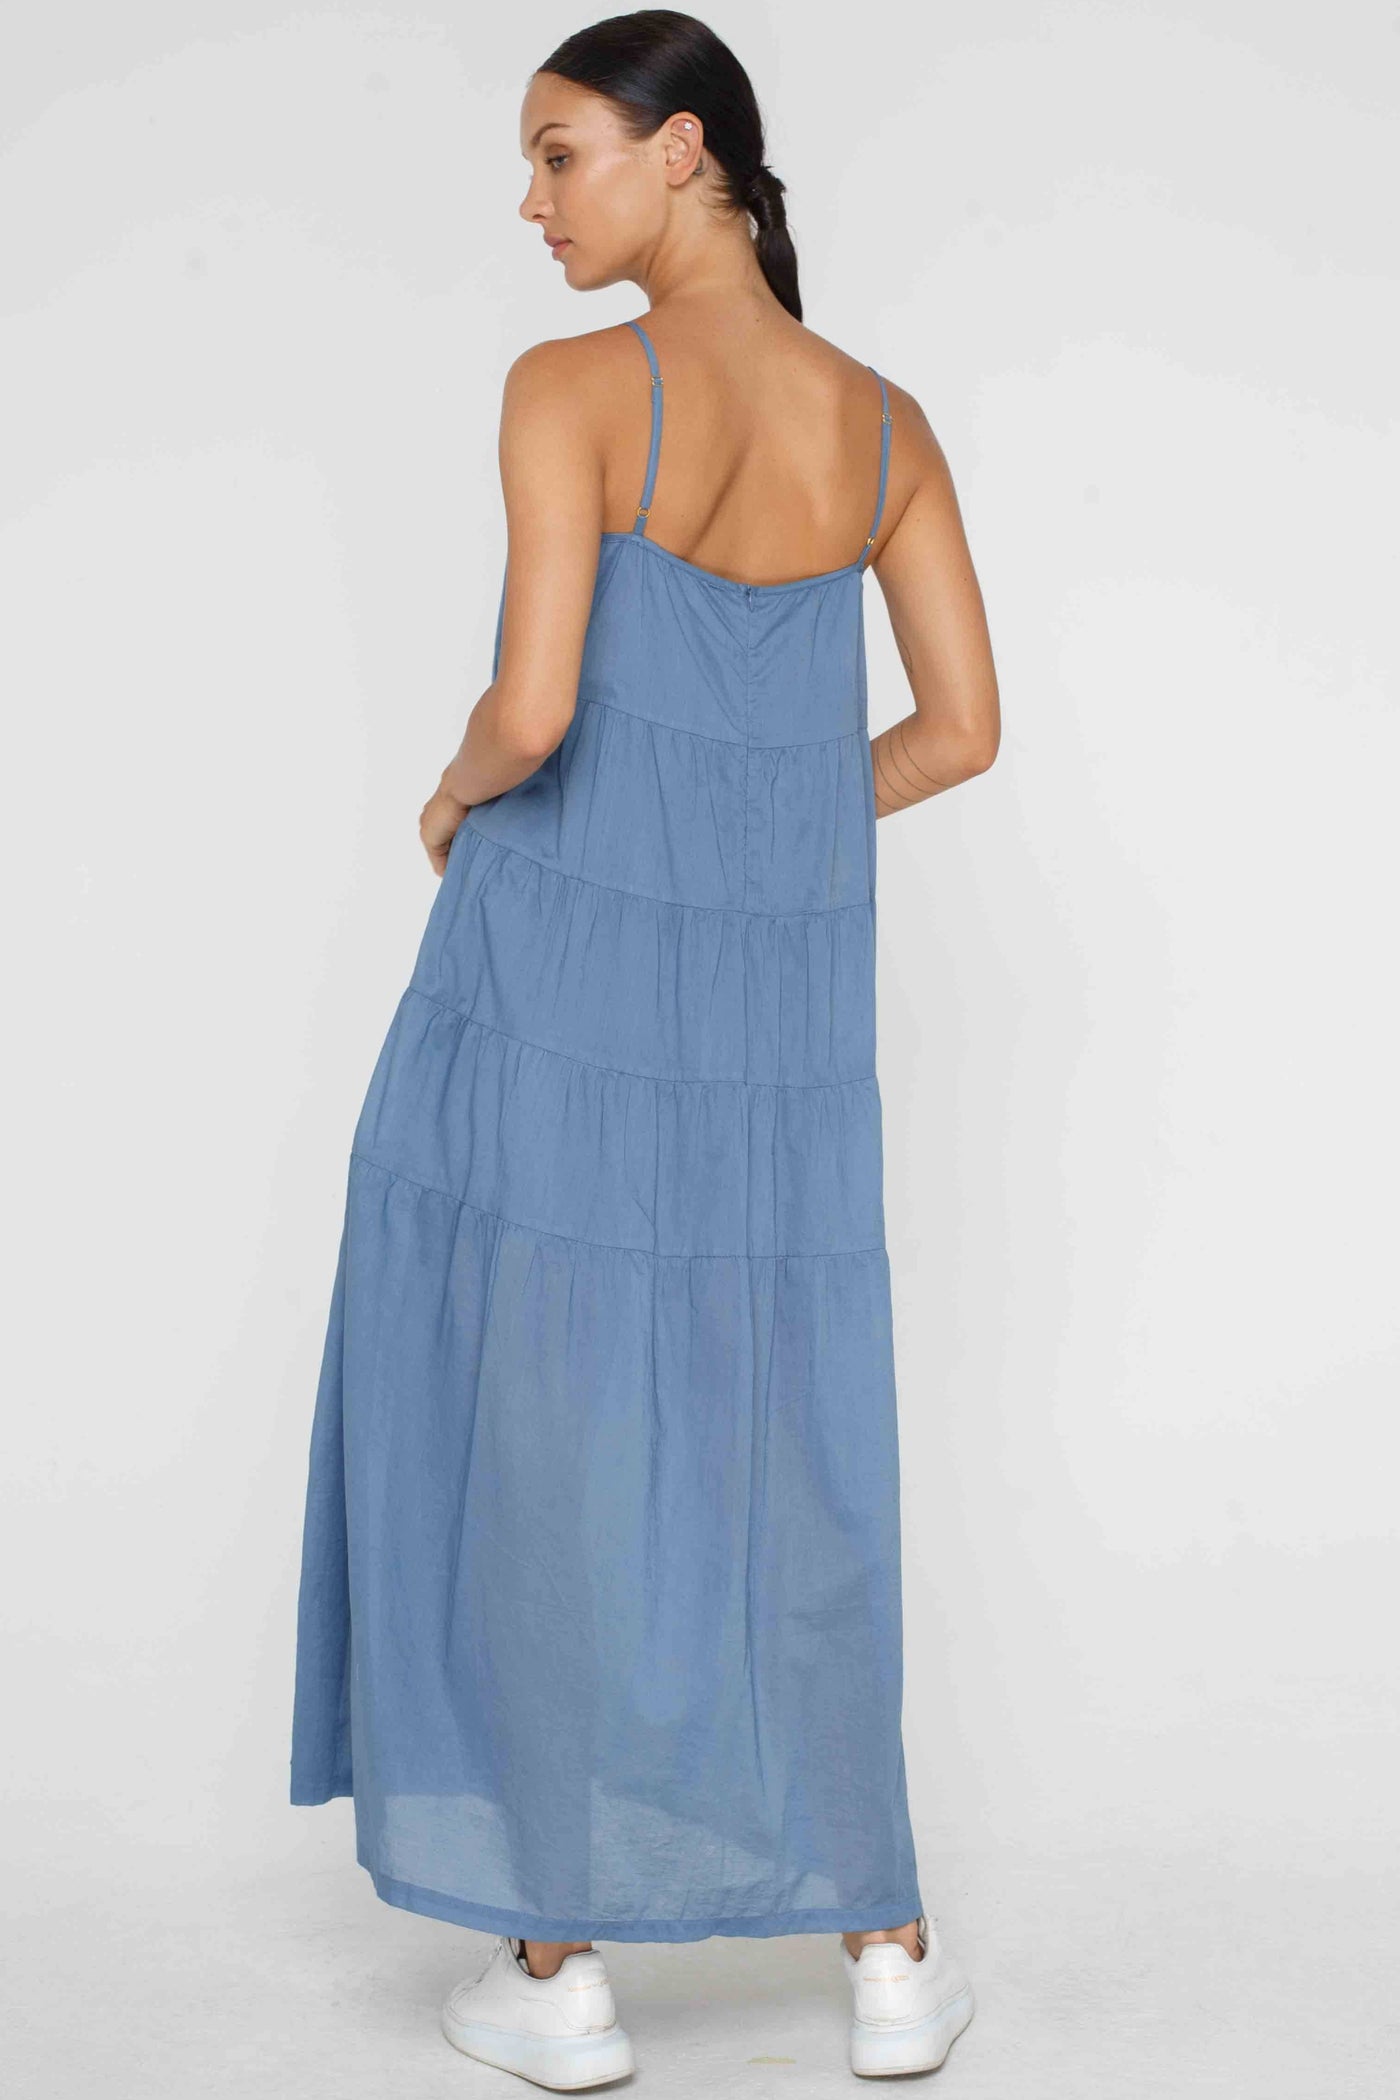 BLAK CARMEN DRESS - DENIM BLUE  The Blak Carmen Dress is a relaxed fitting maxi length now available in Denim Blue.  The Carmen Dress can easily be dressed up or down and looks great layered over a fitted tee. 